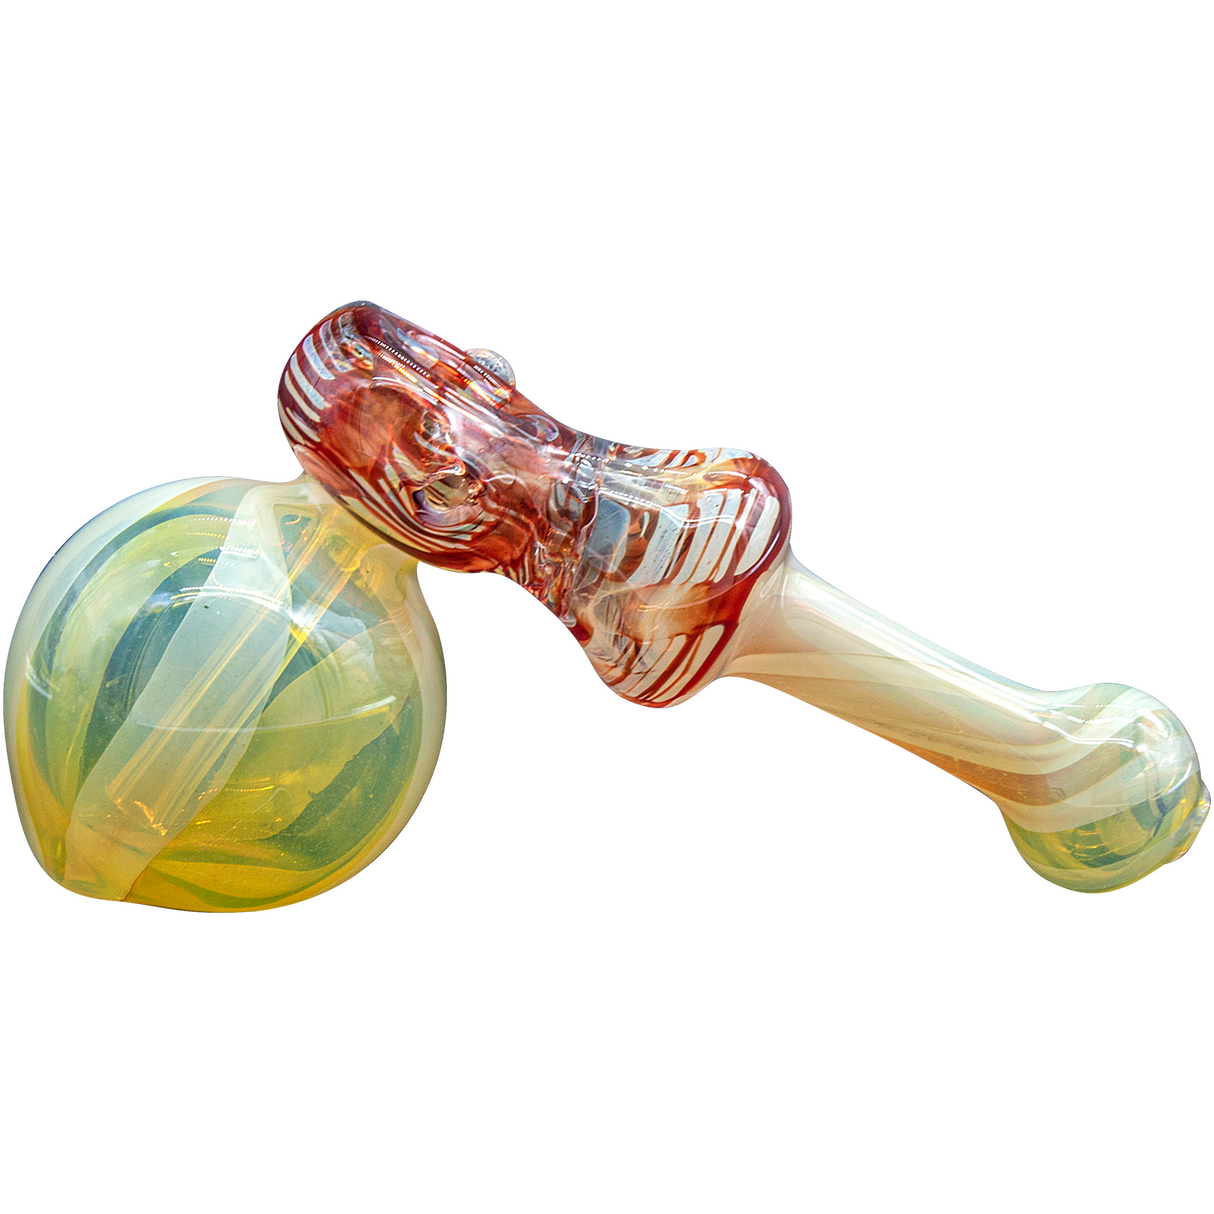 LA Pipes "Raked Hammer" Fumed Hammer Bubbler Pipe in Ruby Red with Borosilicate Glass